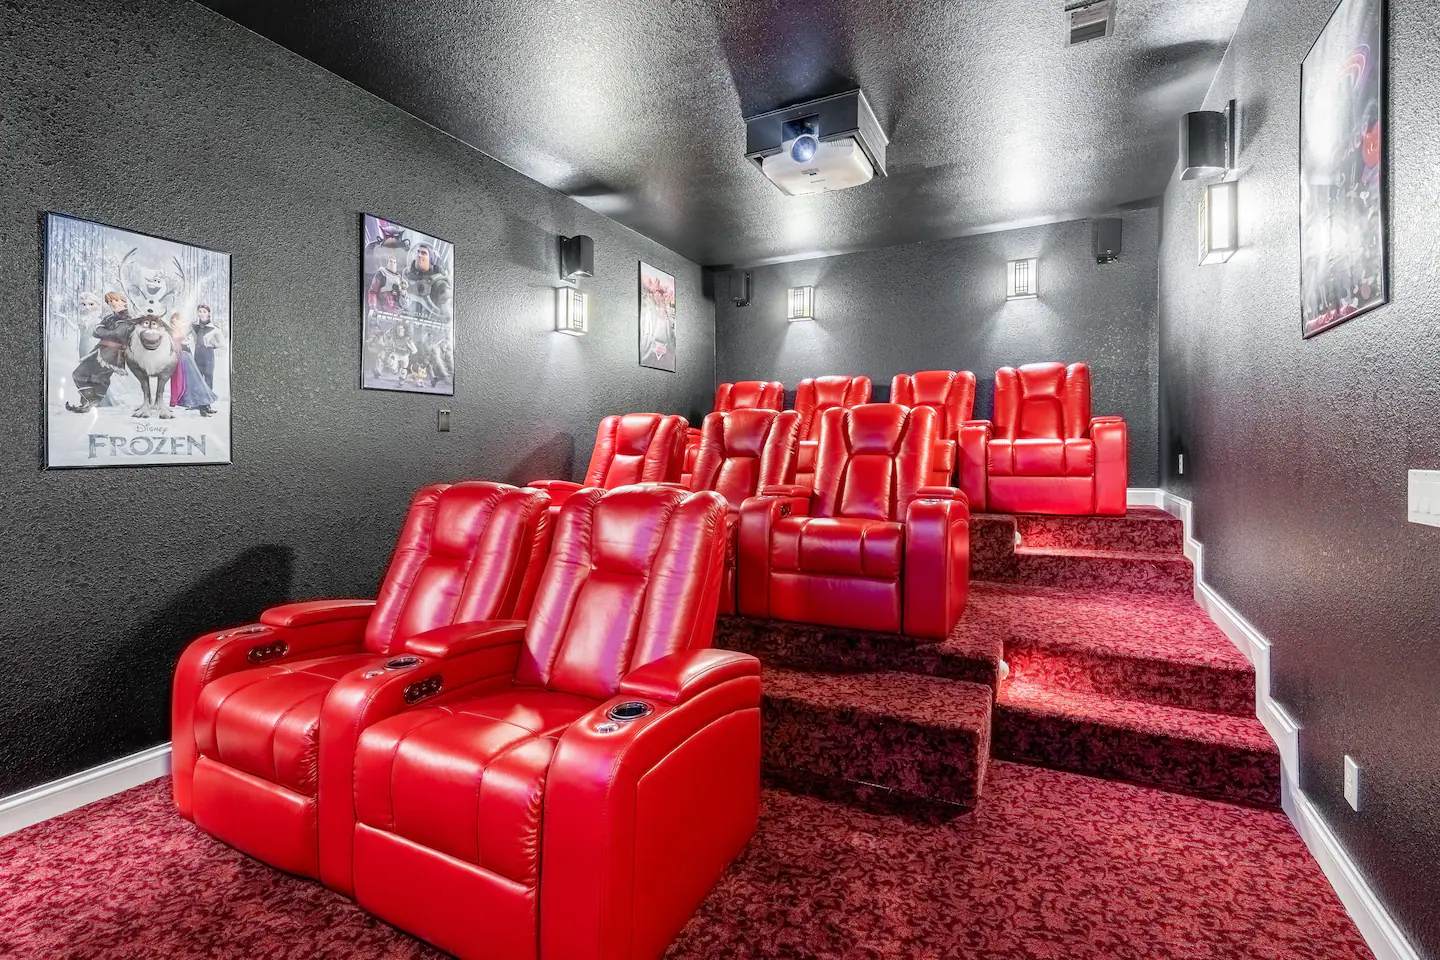 A whole multi-tiered theater room for movie night